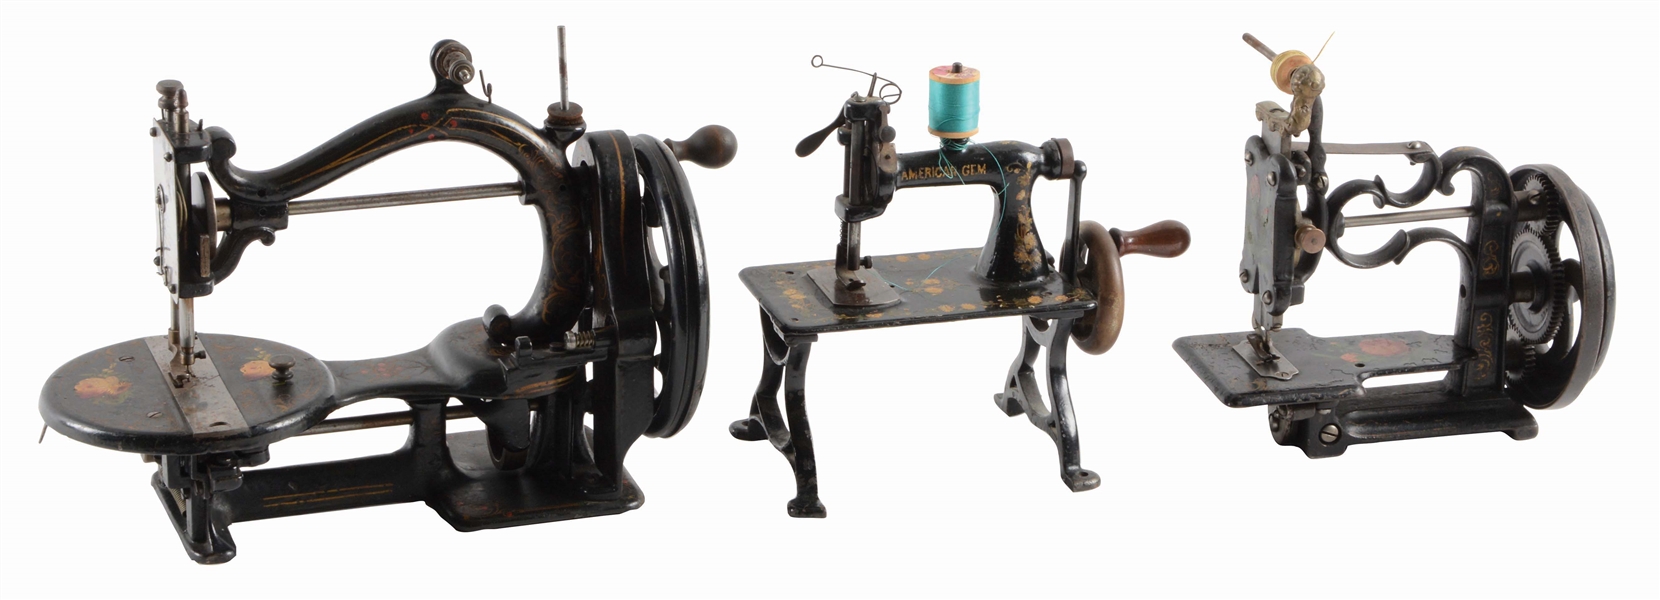 LOT OF 3: SEWING MACHINES BY AMERICAN GEM.